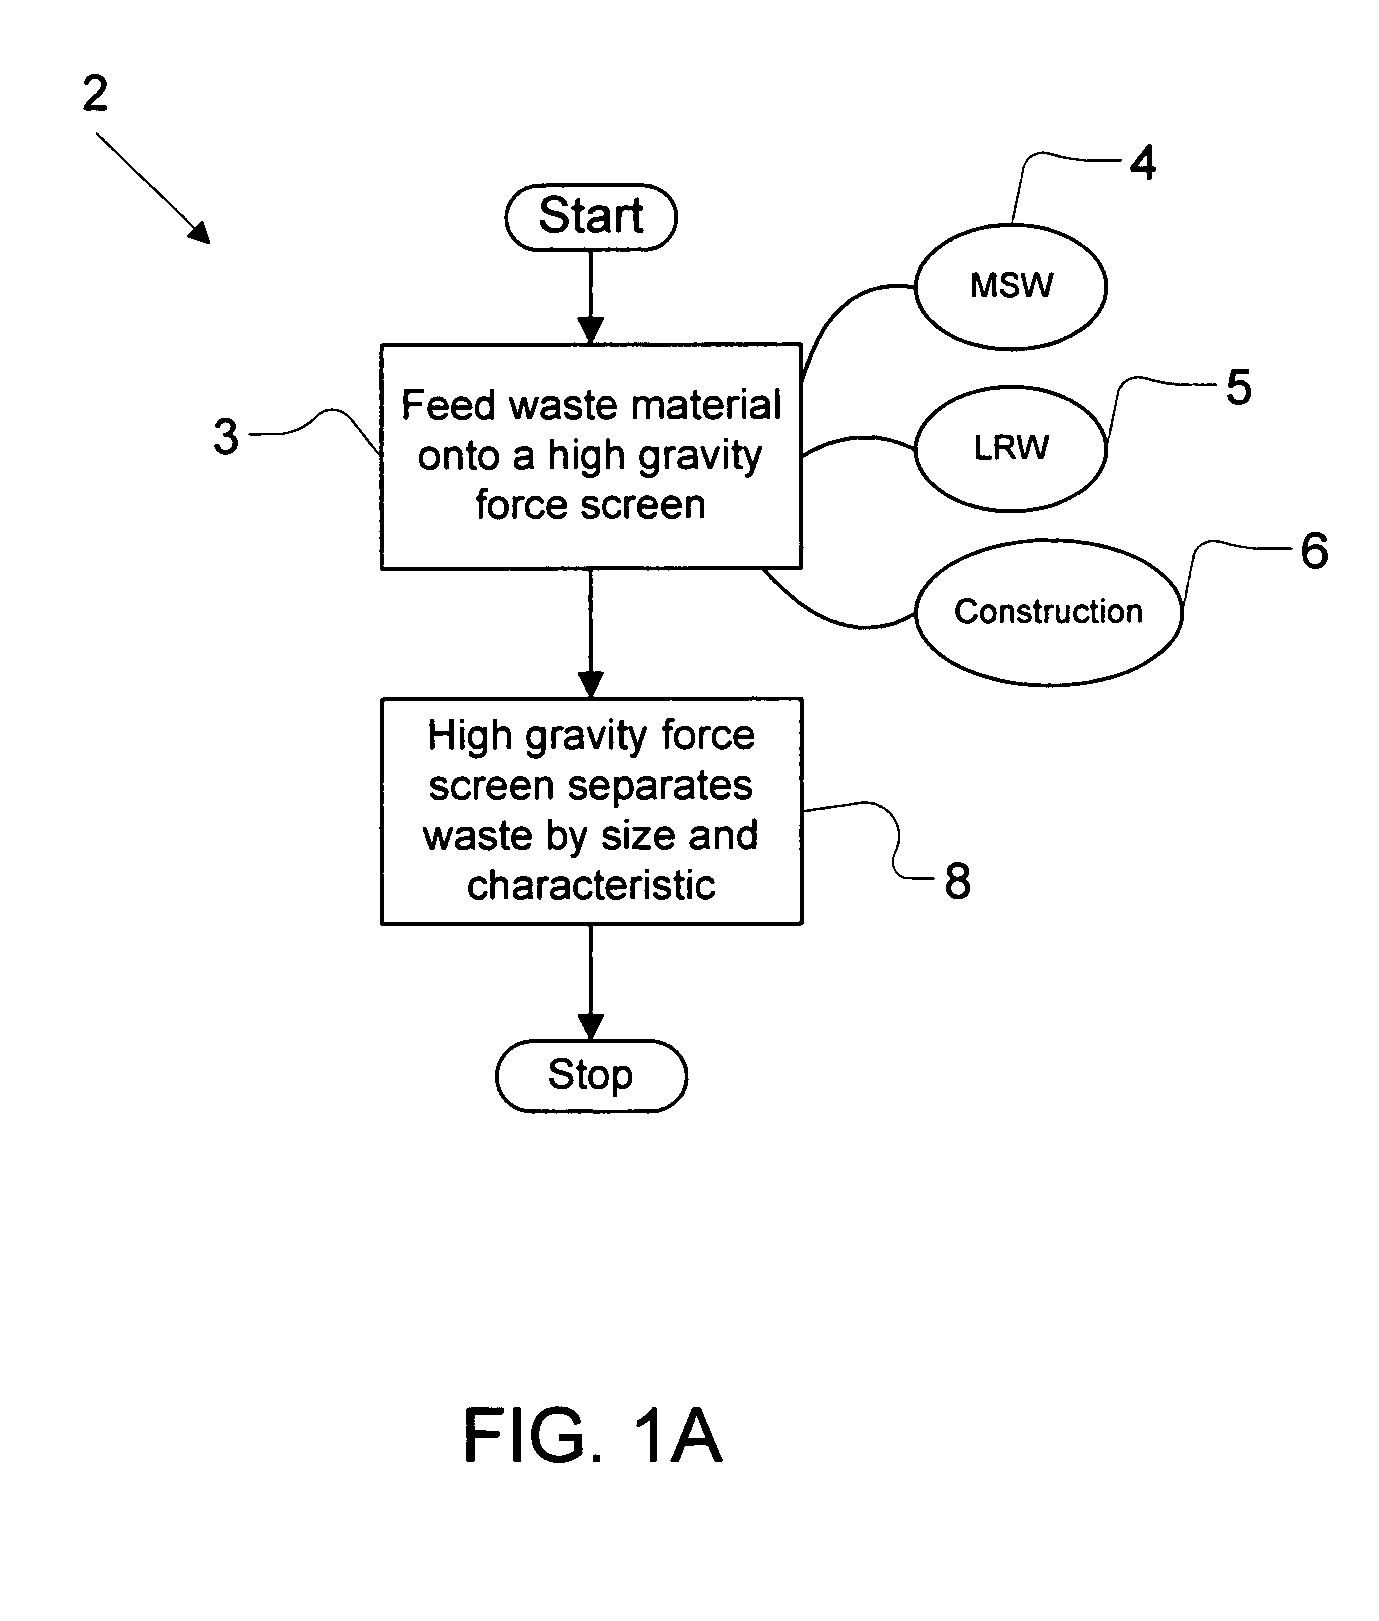 System and method for processing waste and recovering recyclable materials